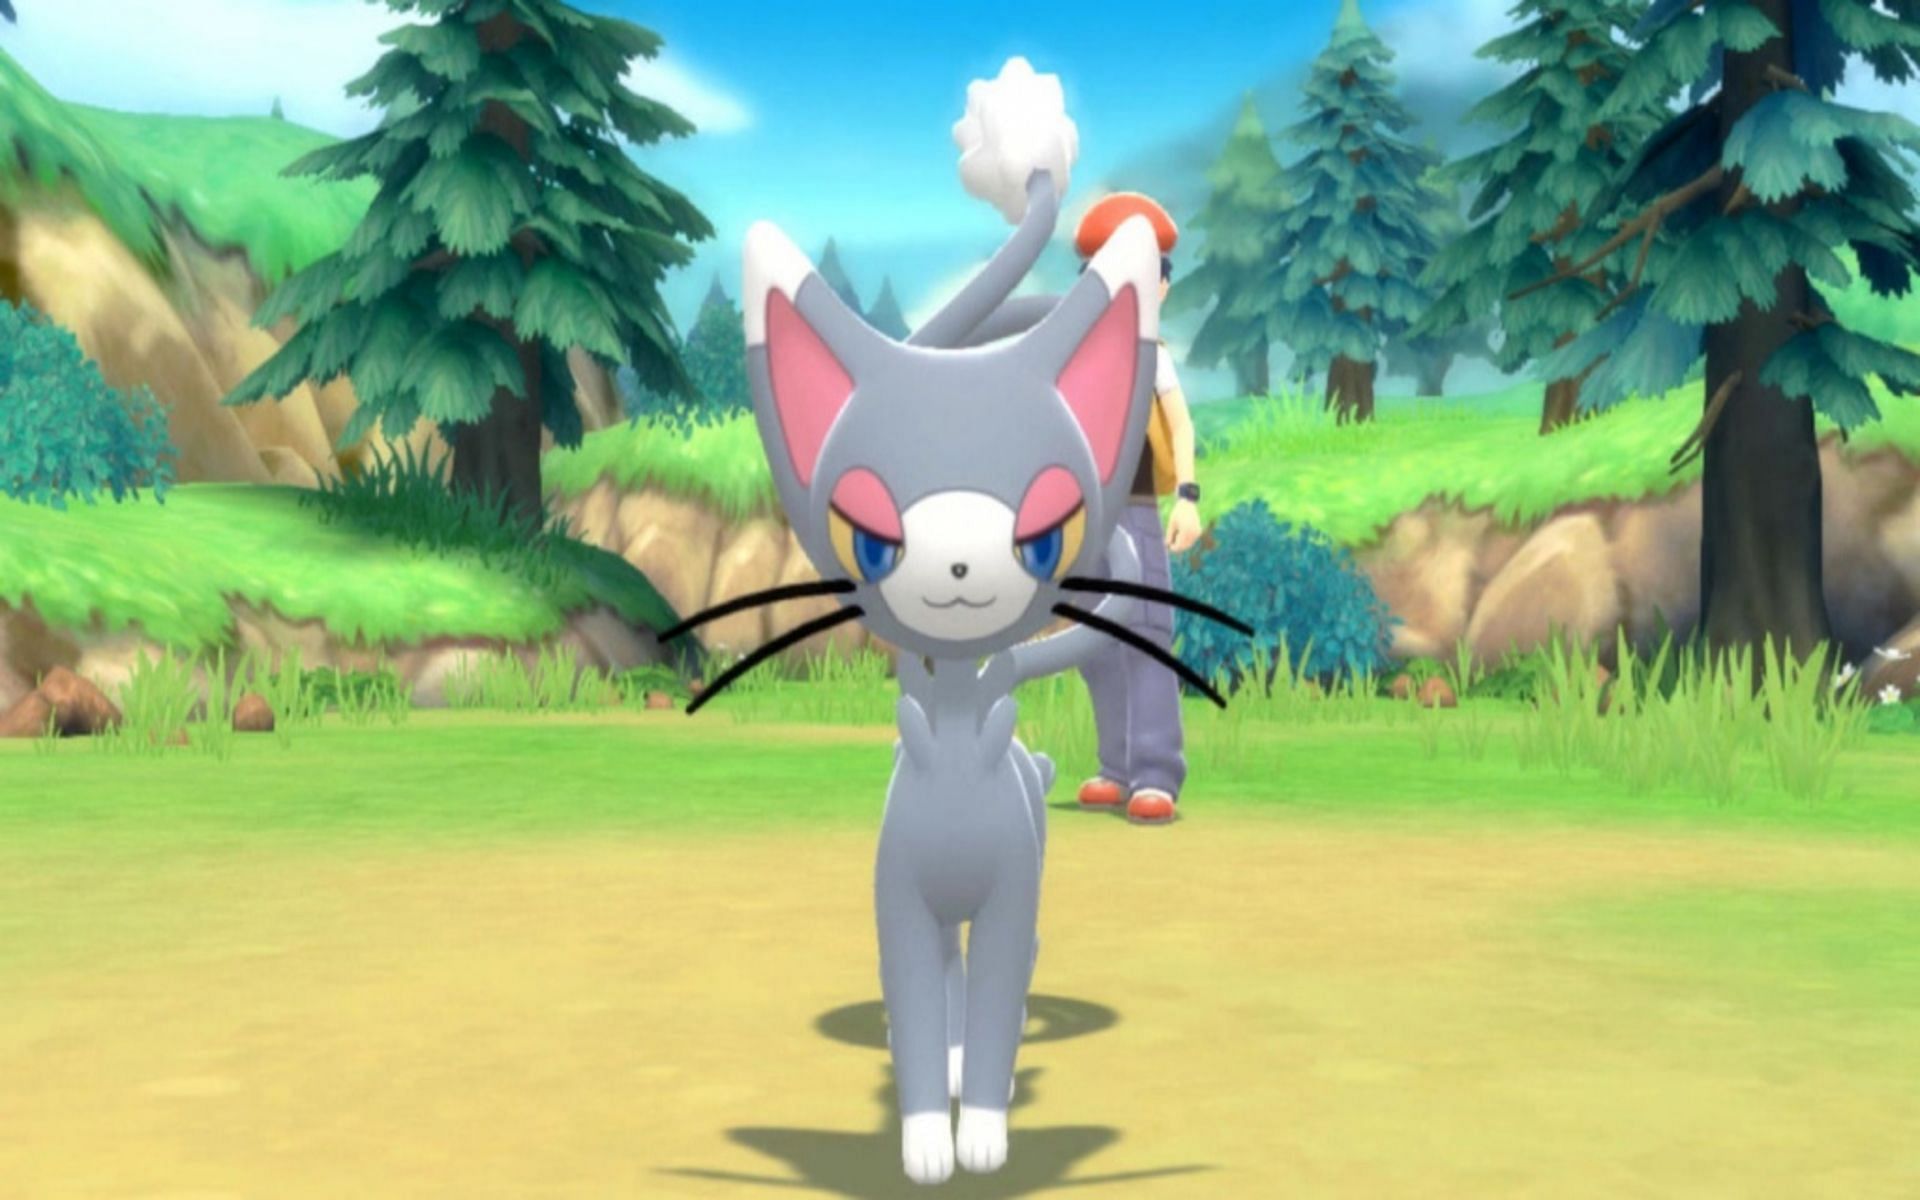 Glameow can be found in two Routes in Sinnoh (Image via The Pokemon Company)